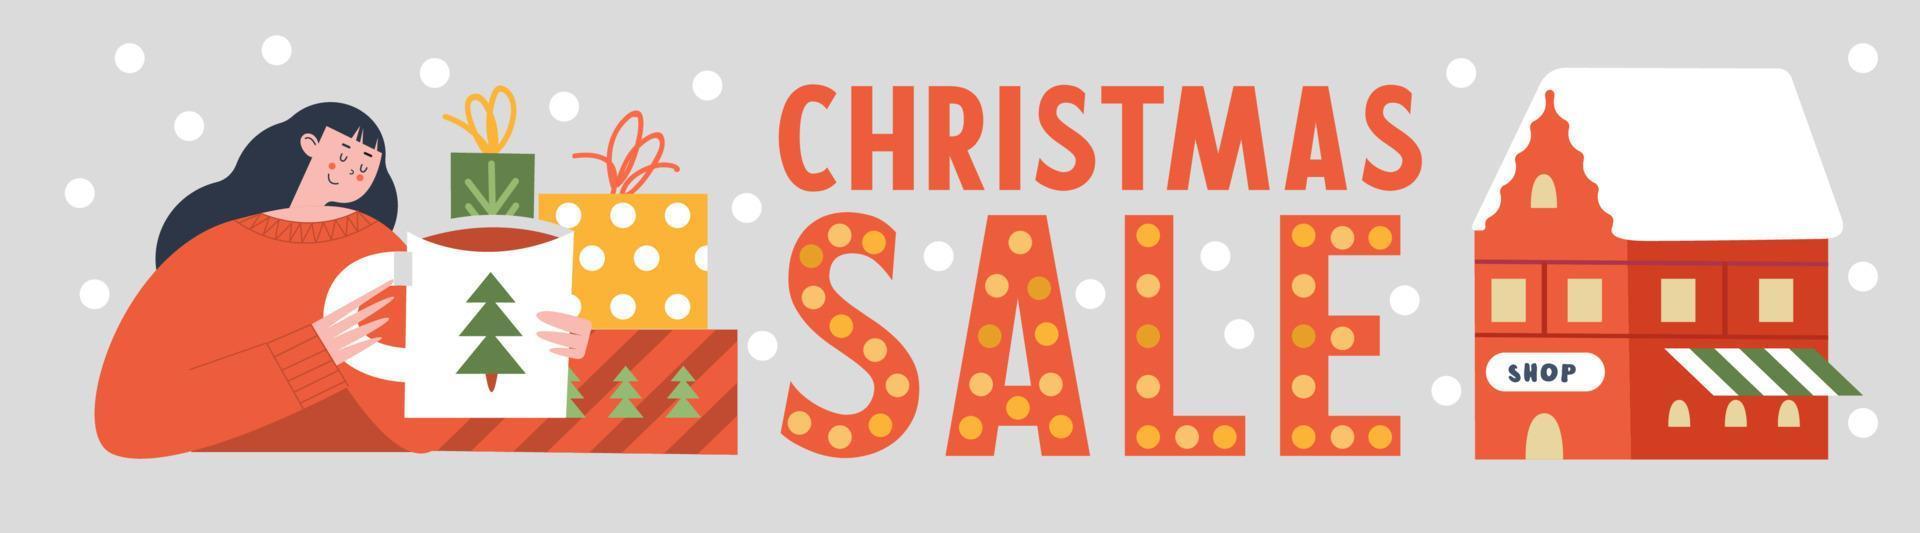 Christmas sale. Vector illustration, greeting banner template, poster.